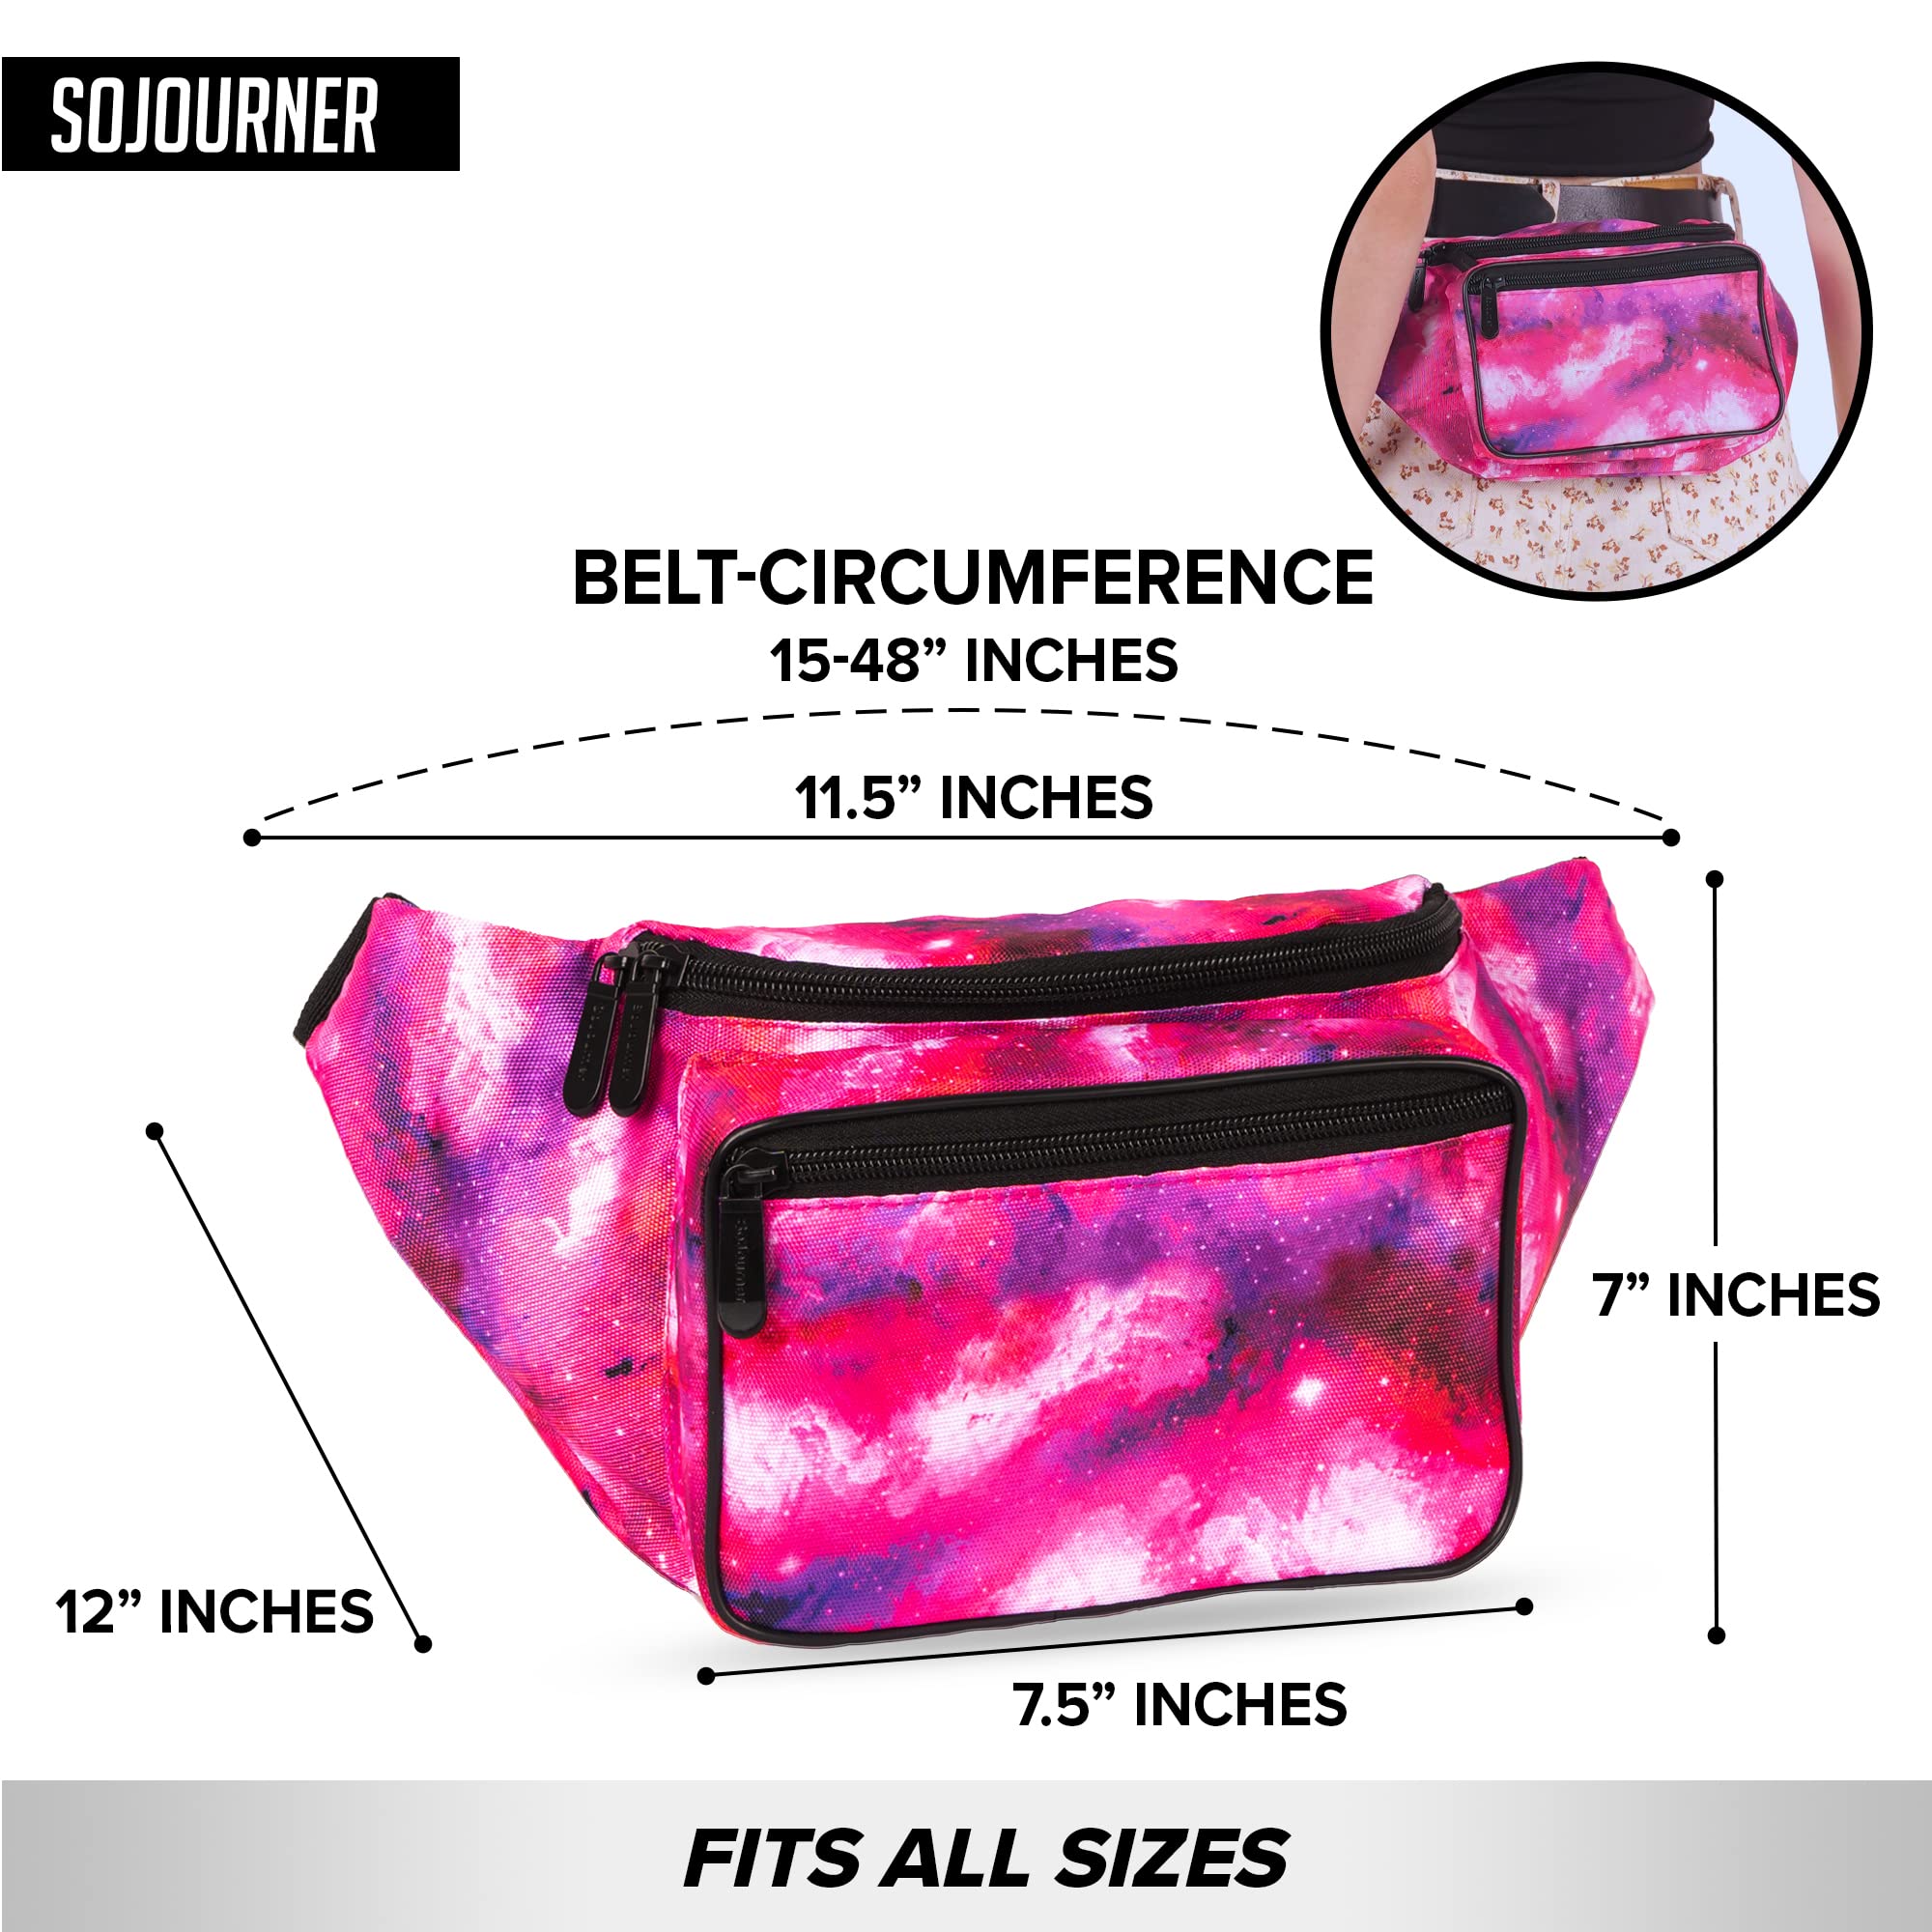 Fanny Pack Belt Bag I Mens Fanny Packs for Women - Crossbody Bag Bum bag Waist Bag Waist Pack -For Halloween costumes, for Hiking, Running, Travel, Waterproof and more (Galaxy Pink & Purple)